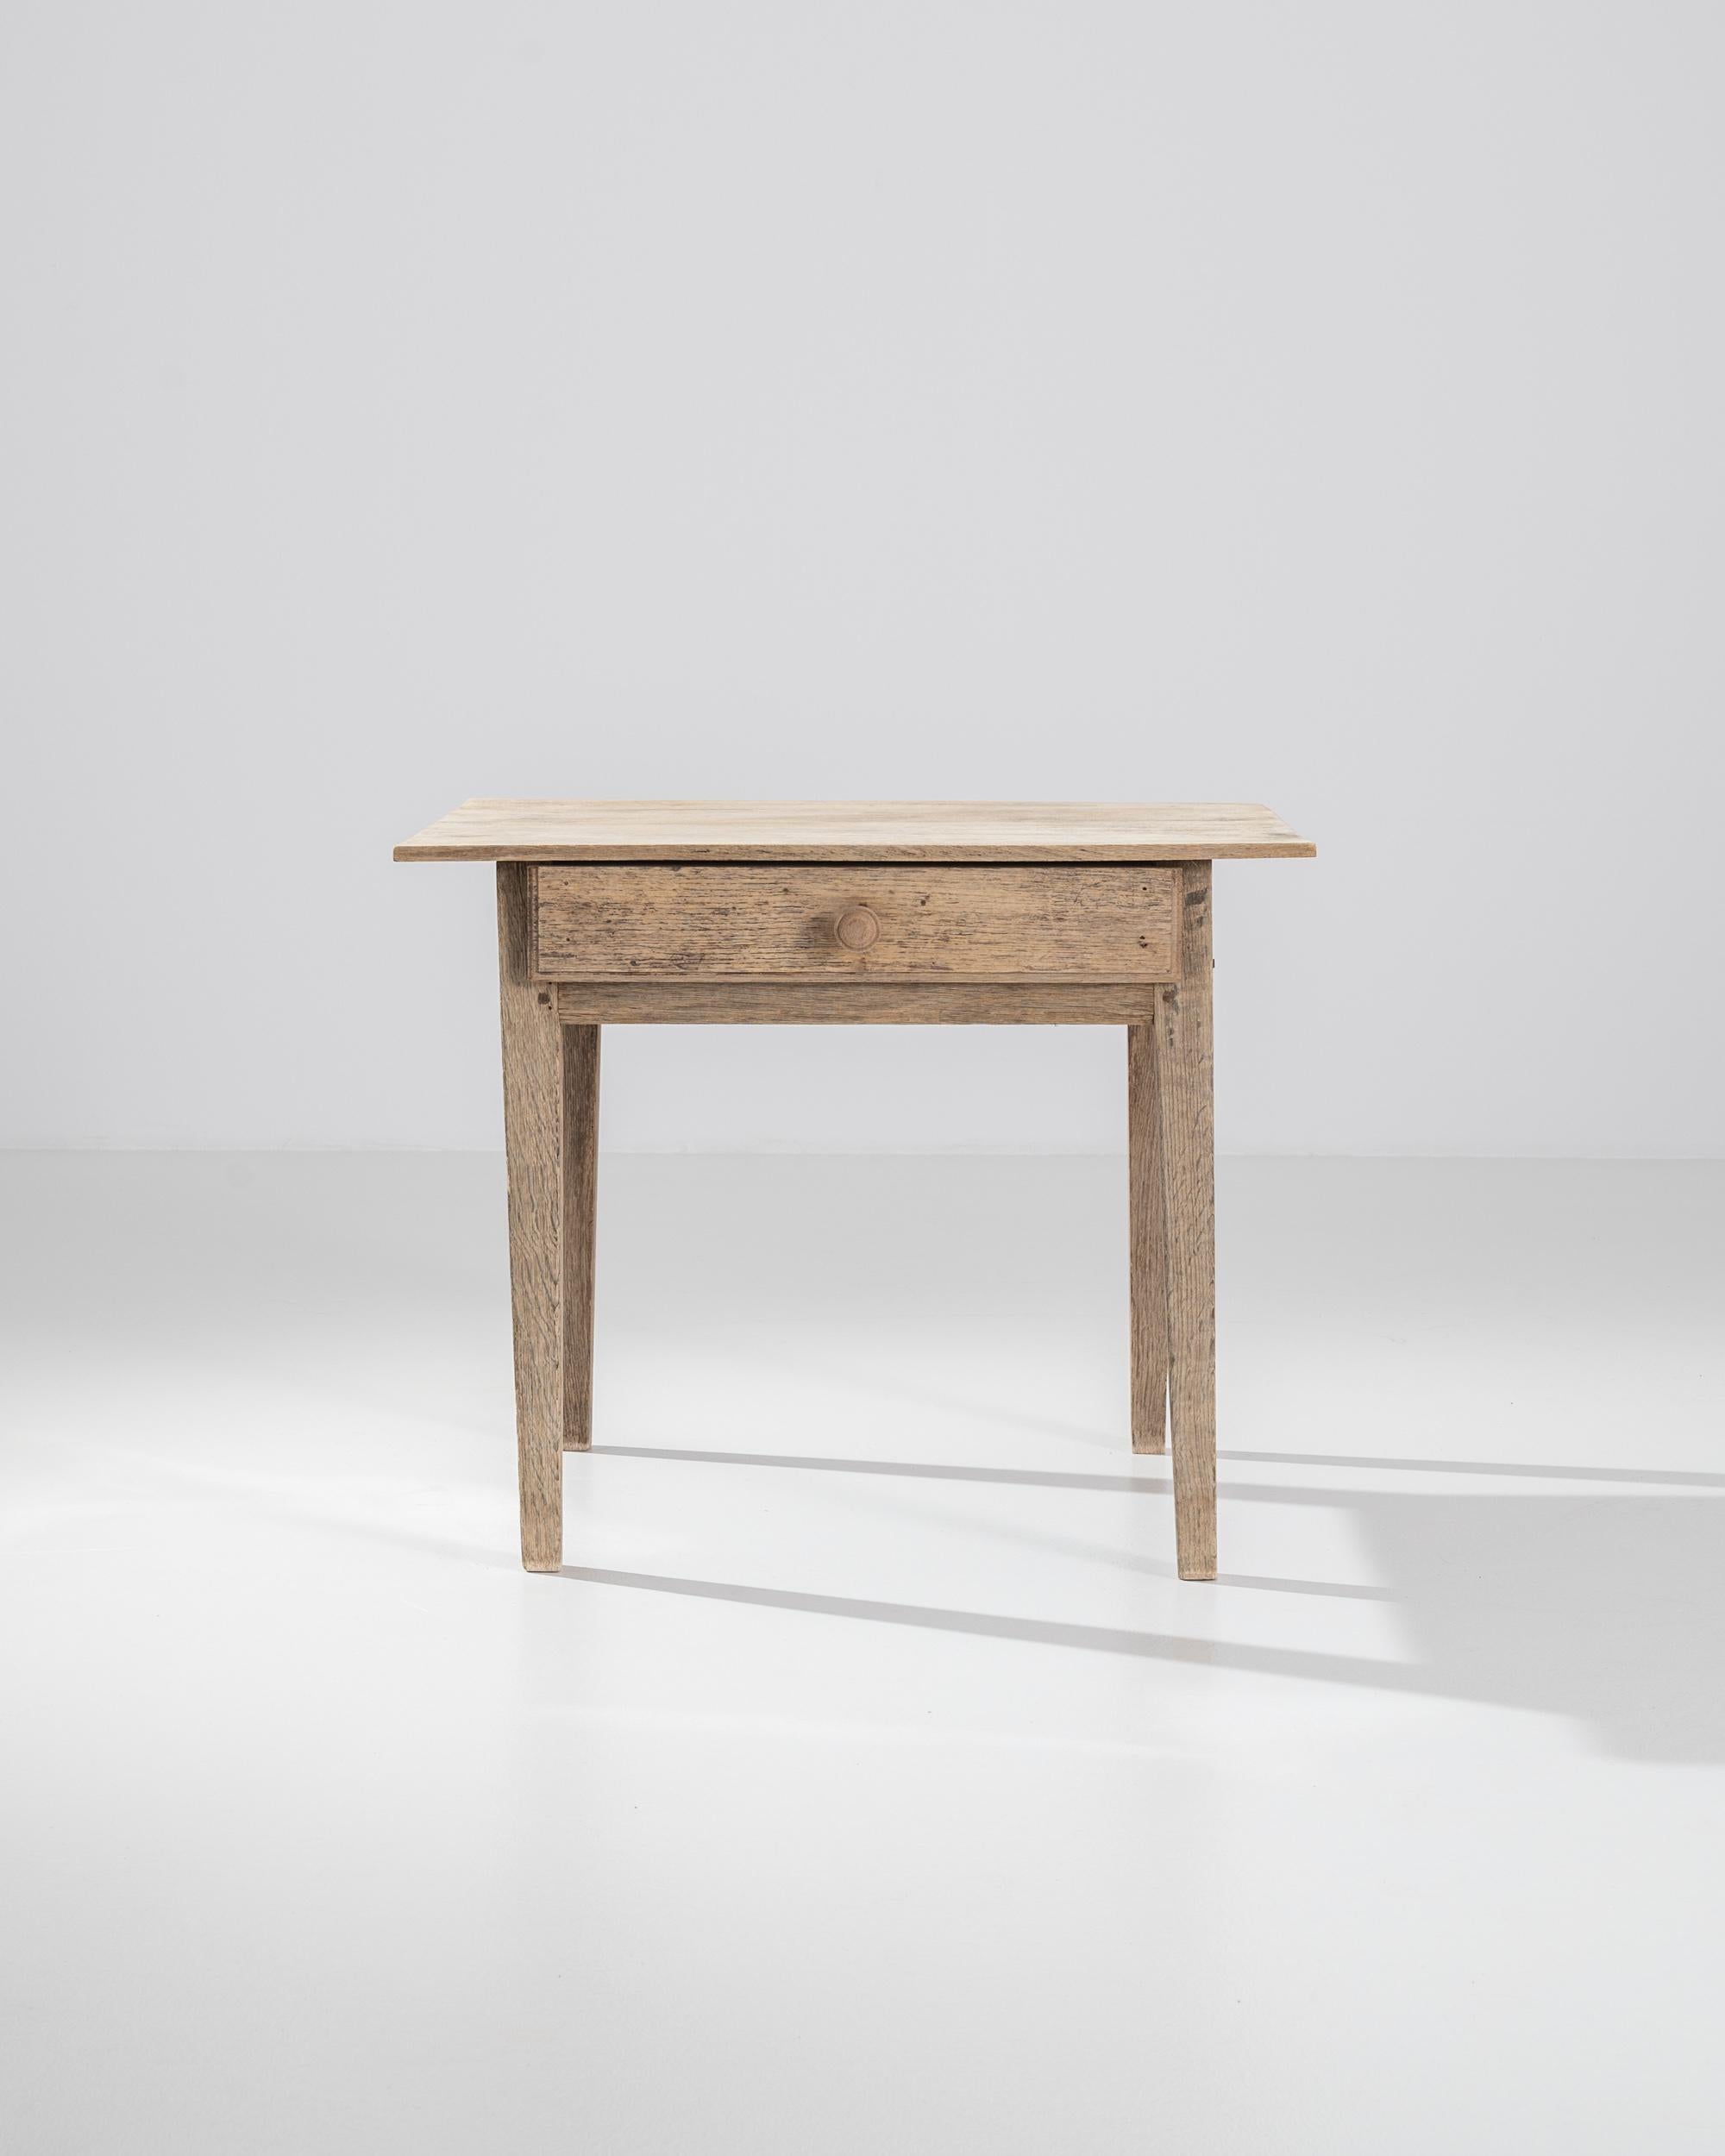 Crafted in France in the 19th Century, this oaken table has managed to capture the essential charm of necessity. Rather than the perfection of machine made geometry, this handmade piece stands with the swagger of authenticity, rejecting the